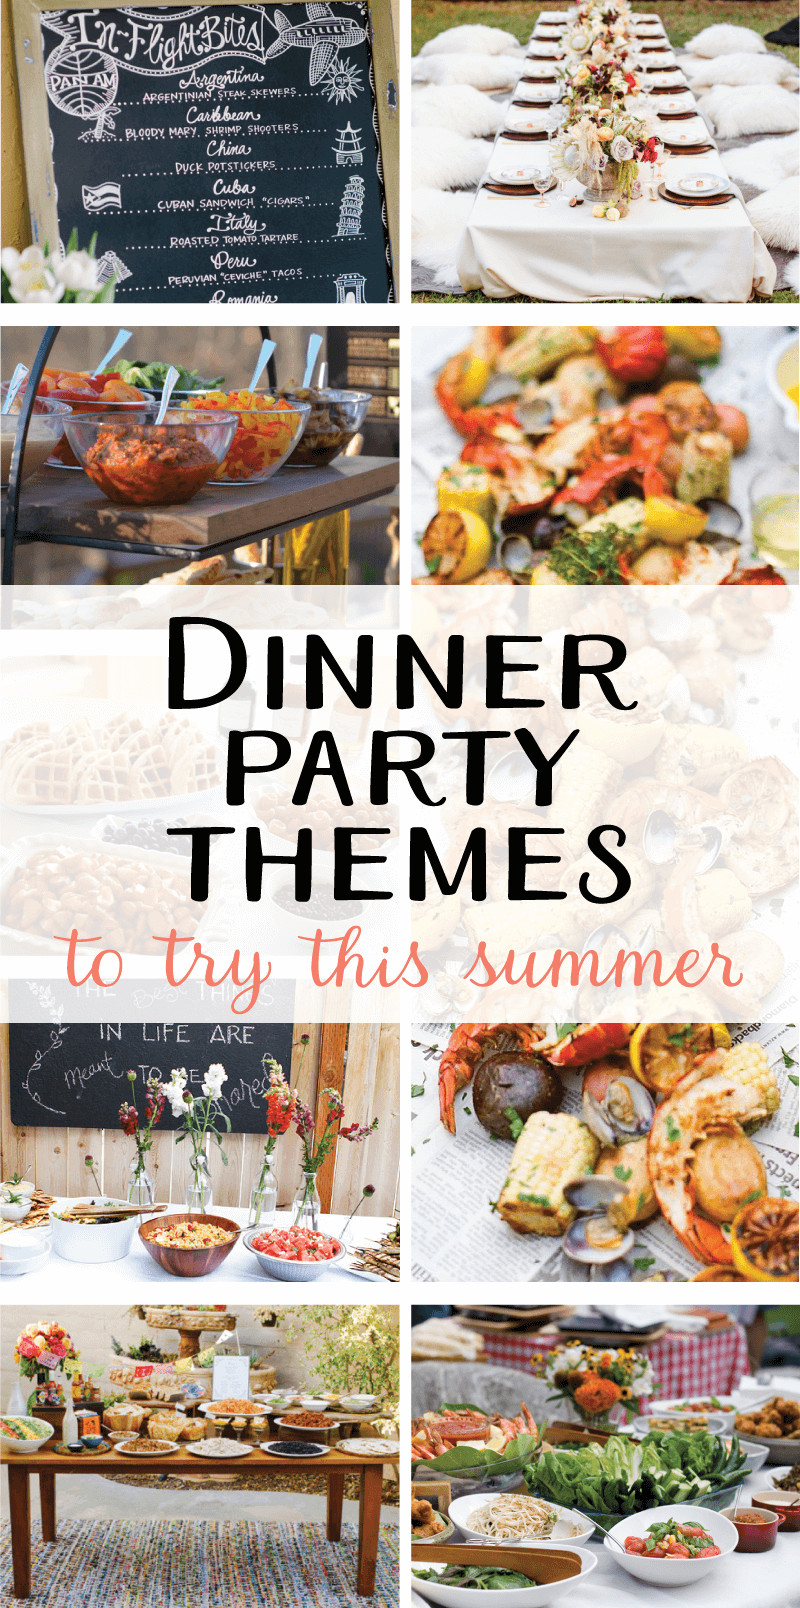 Dinner Party Ideas For Summer
 9 Creative Dinner Party Themes to Try this Summer on Love